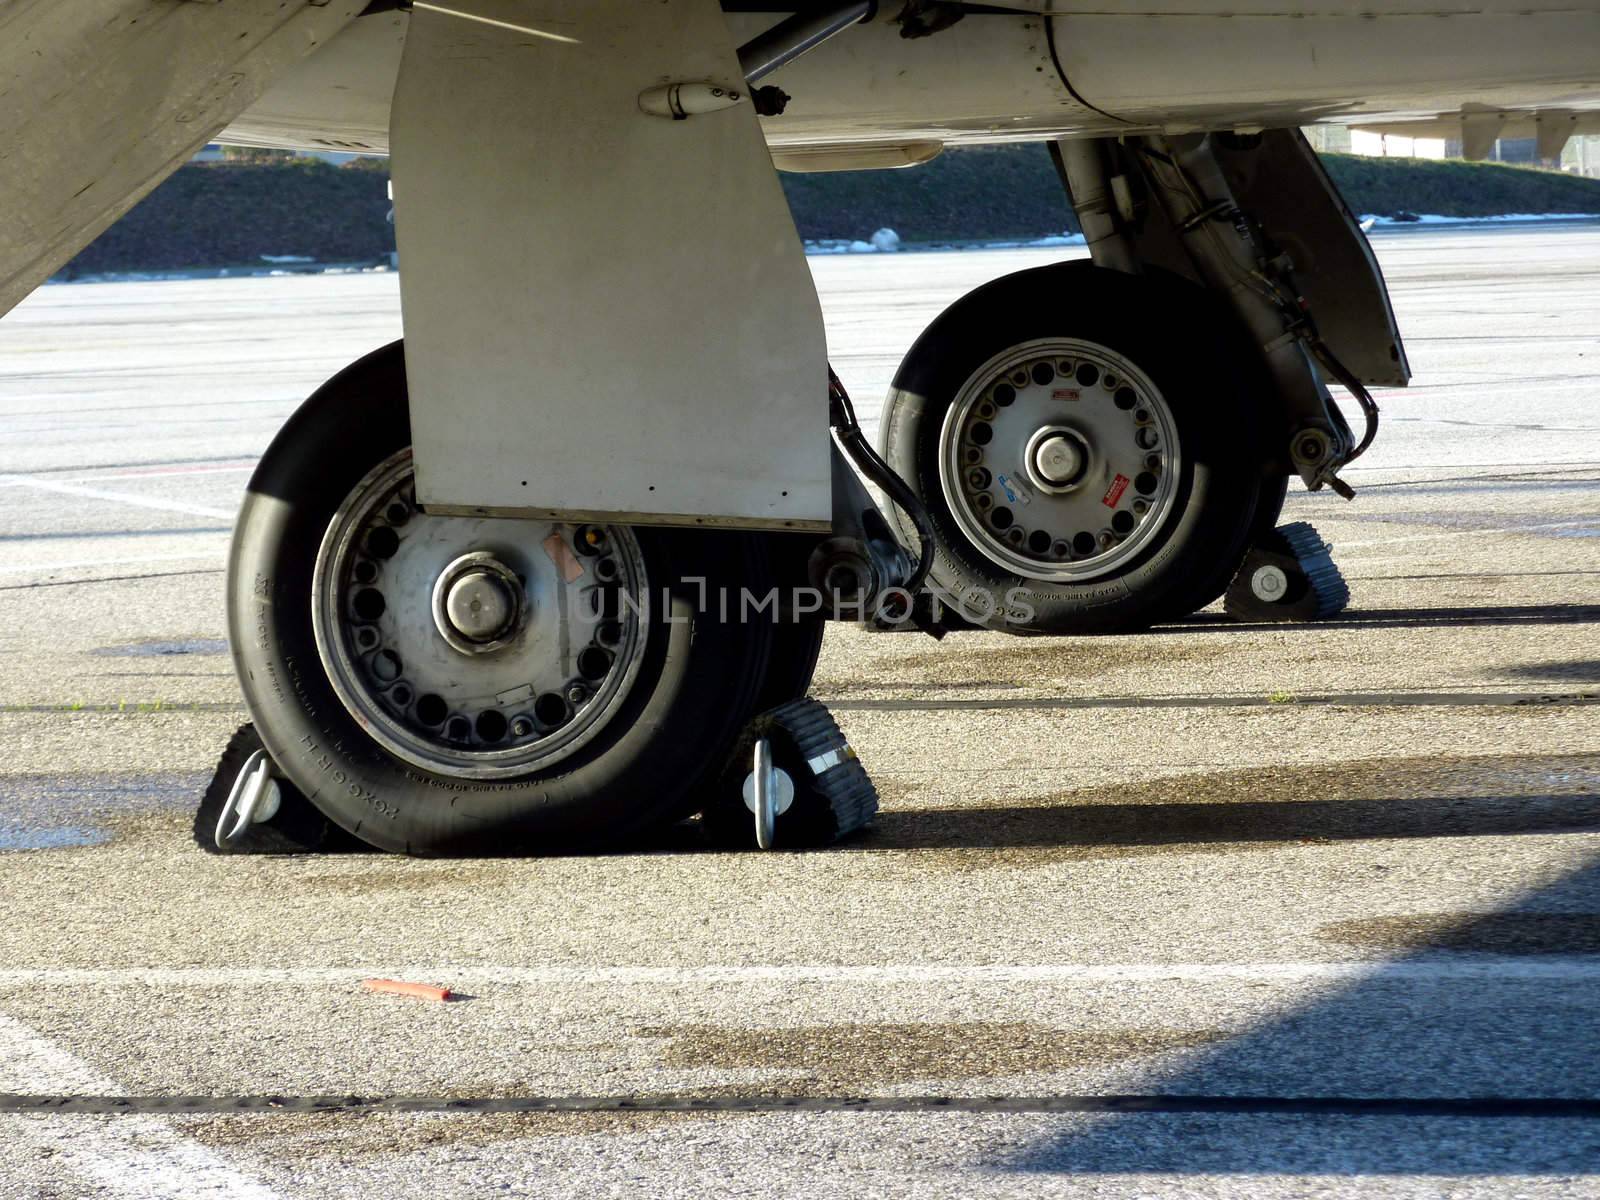 Two wheels of a small airplane on the ground